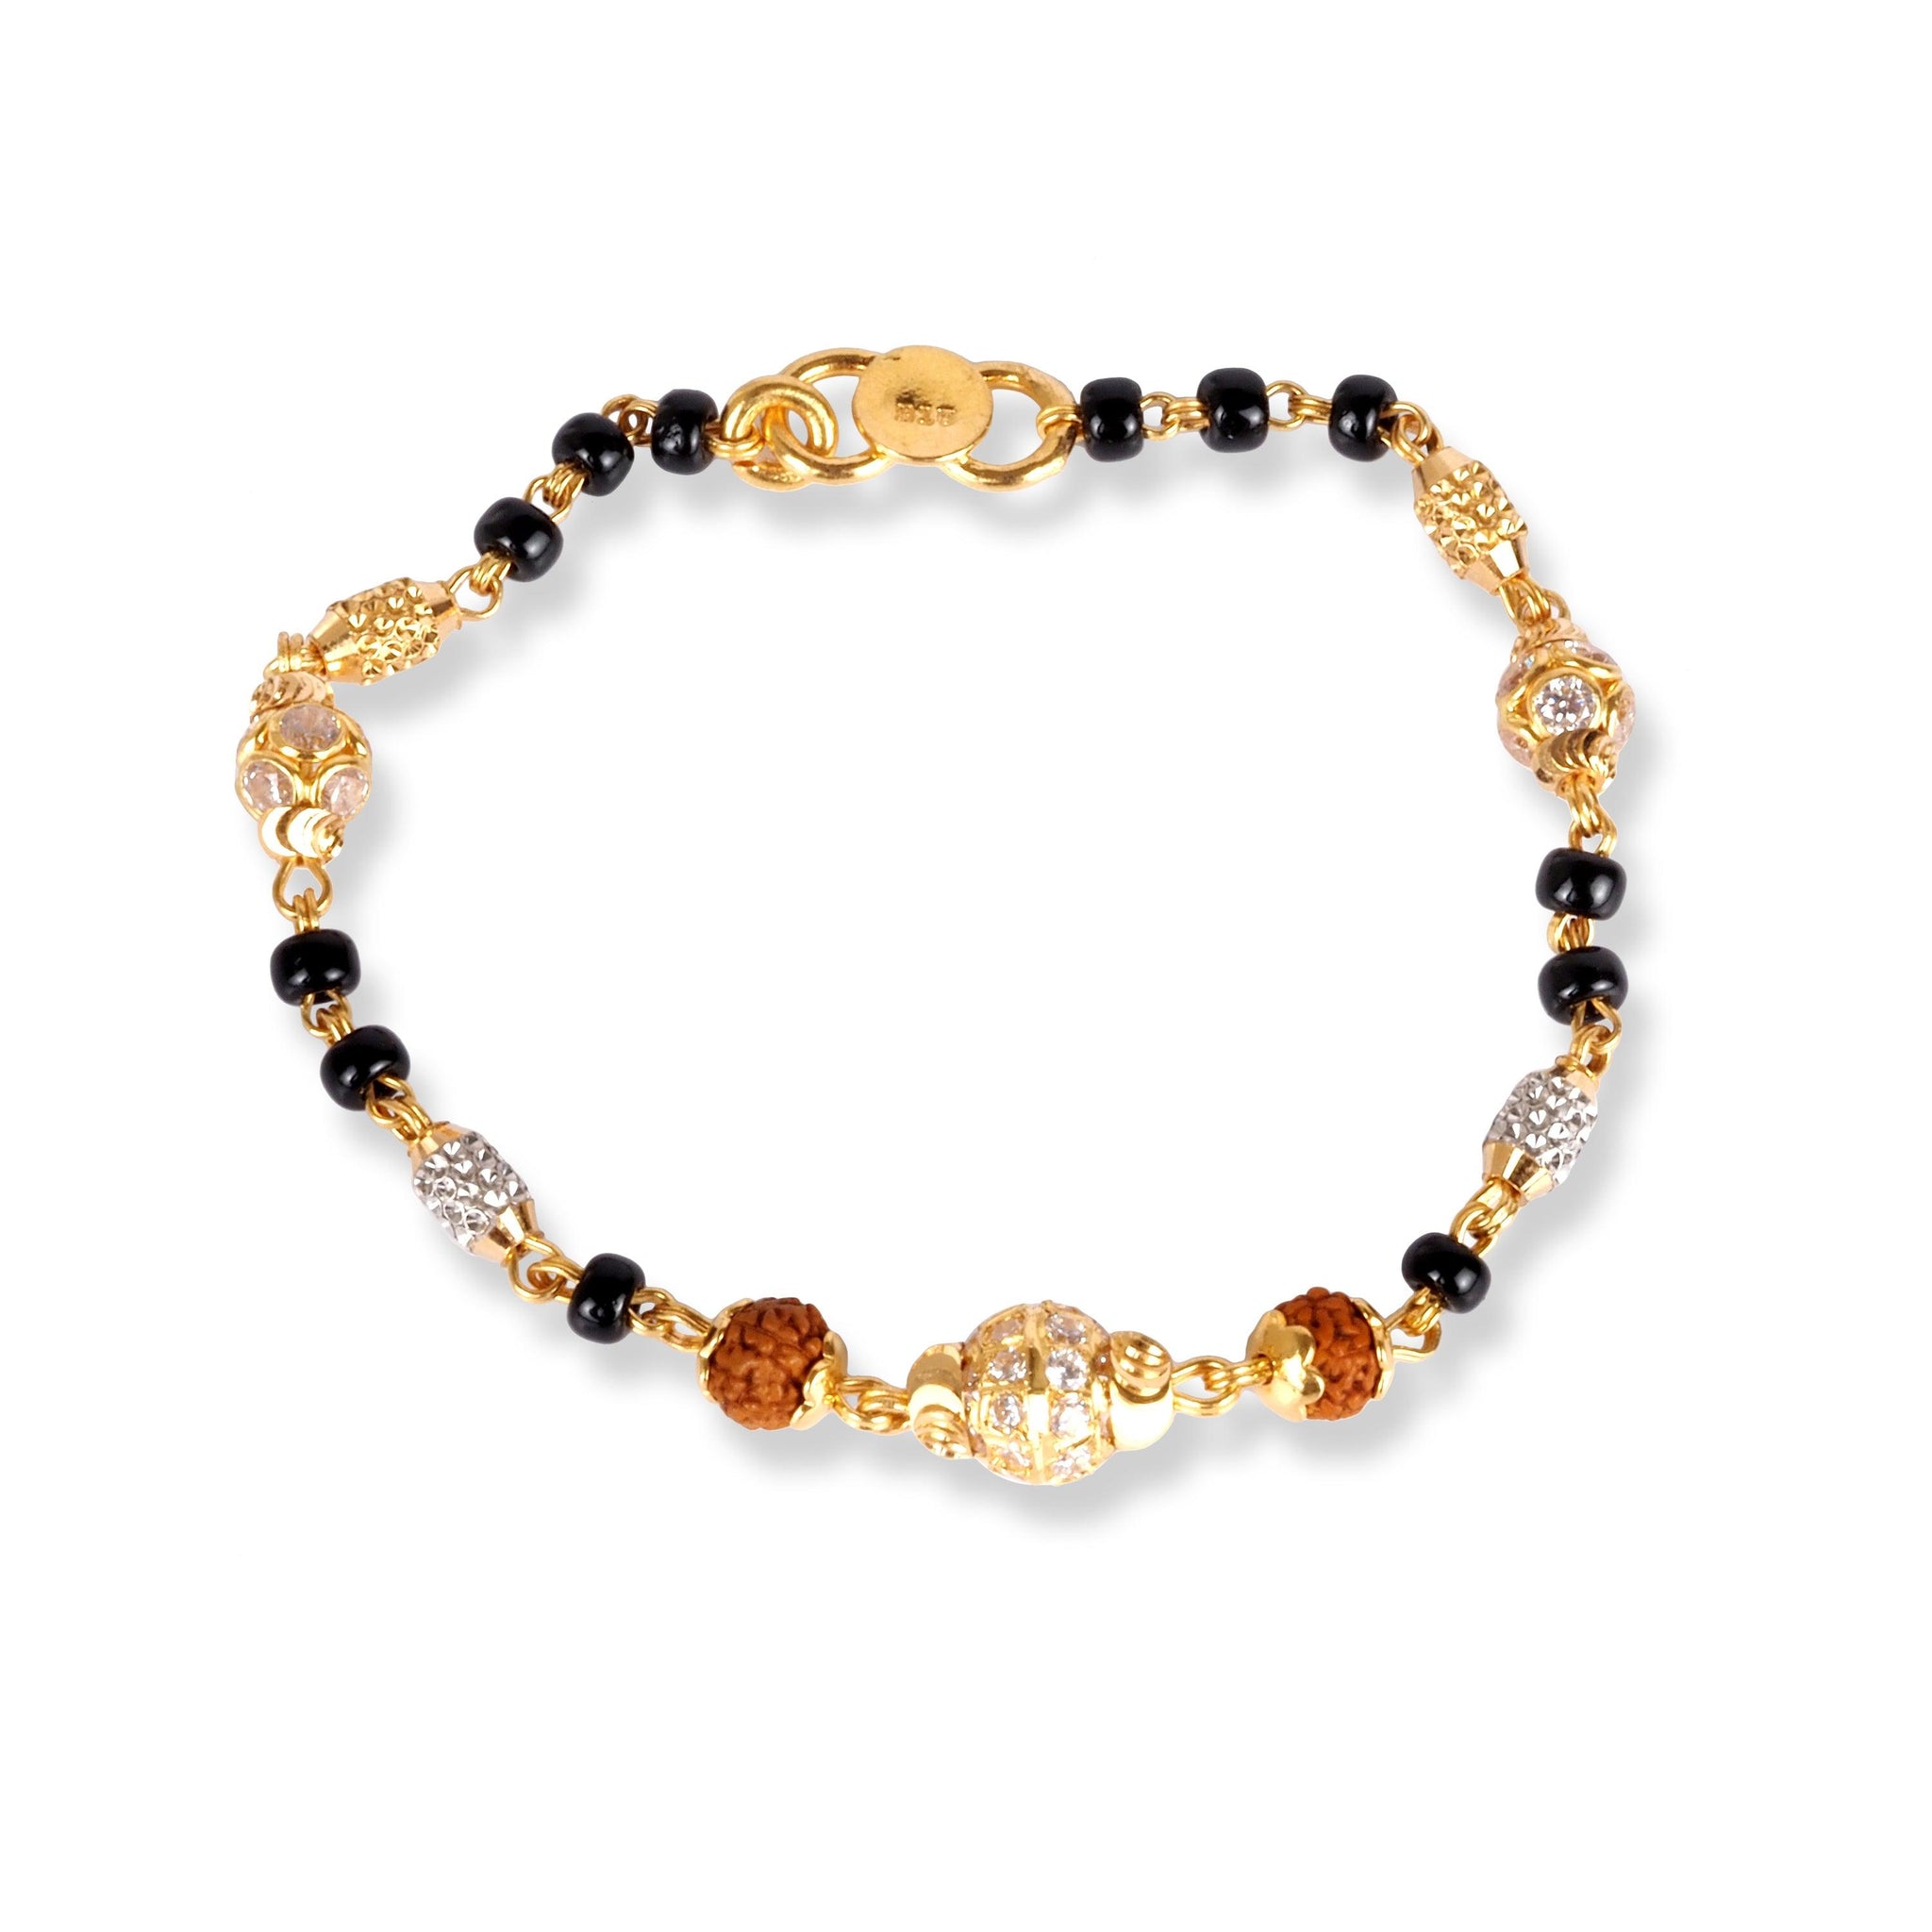 22ct Gold Children's Bracelets with Black Beads and Cubic Zirconia Stones CBR-8466